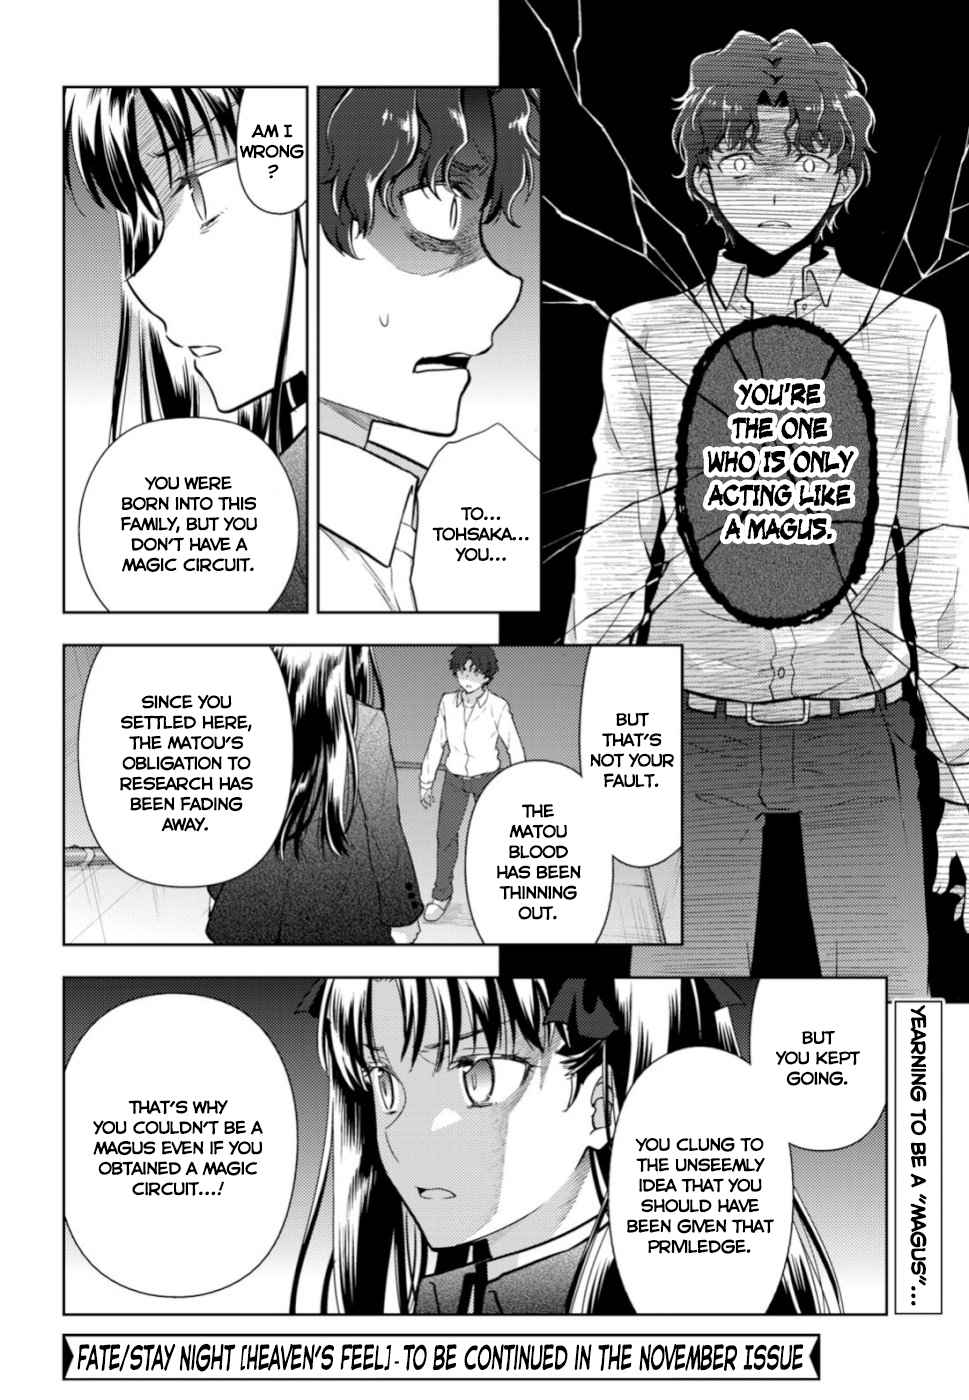 Fate/stay night: Heaven's Feel Vol. 8 Ch. 51 Day 8 / Truth (2)